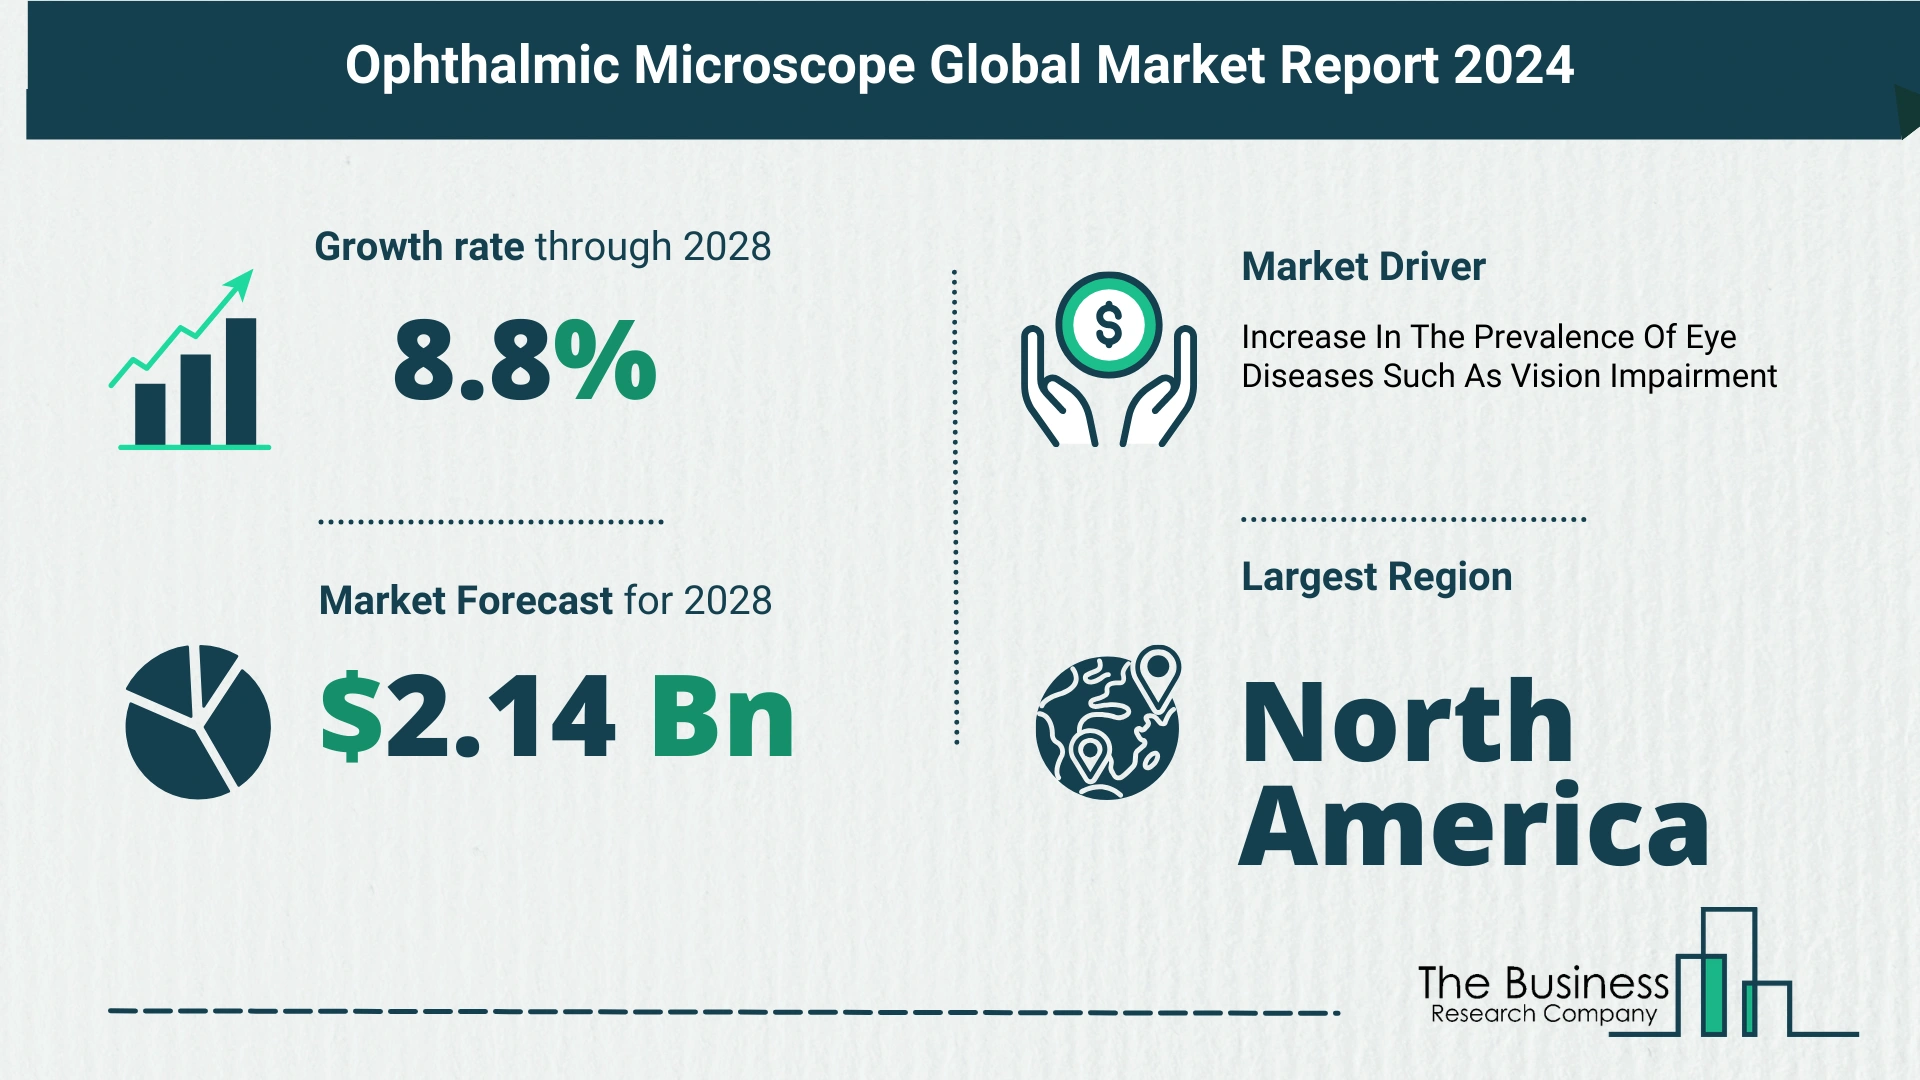 Key Takeaways From The Global Ophthalmic Microscope Market Forecast 2024